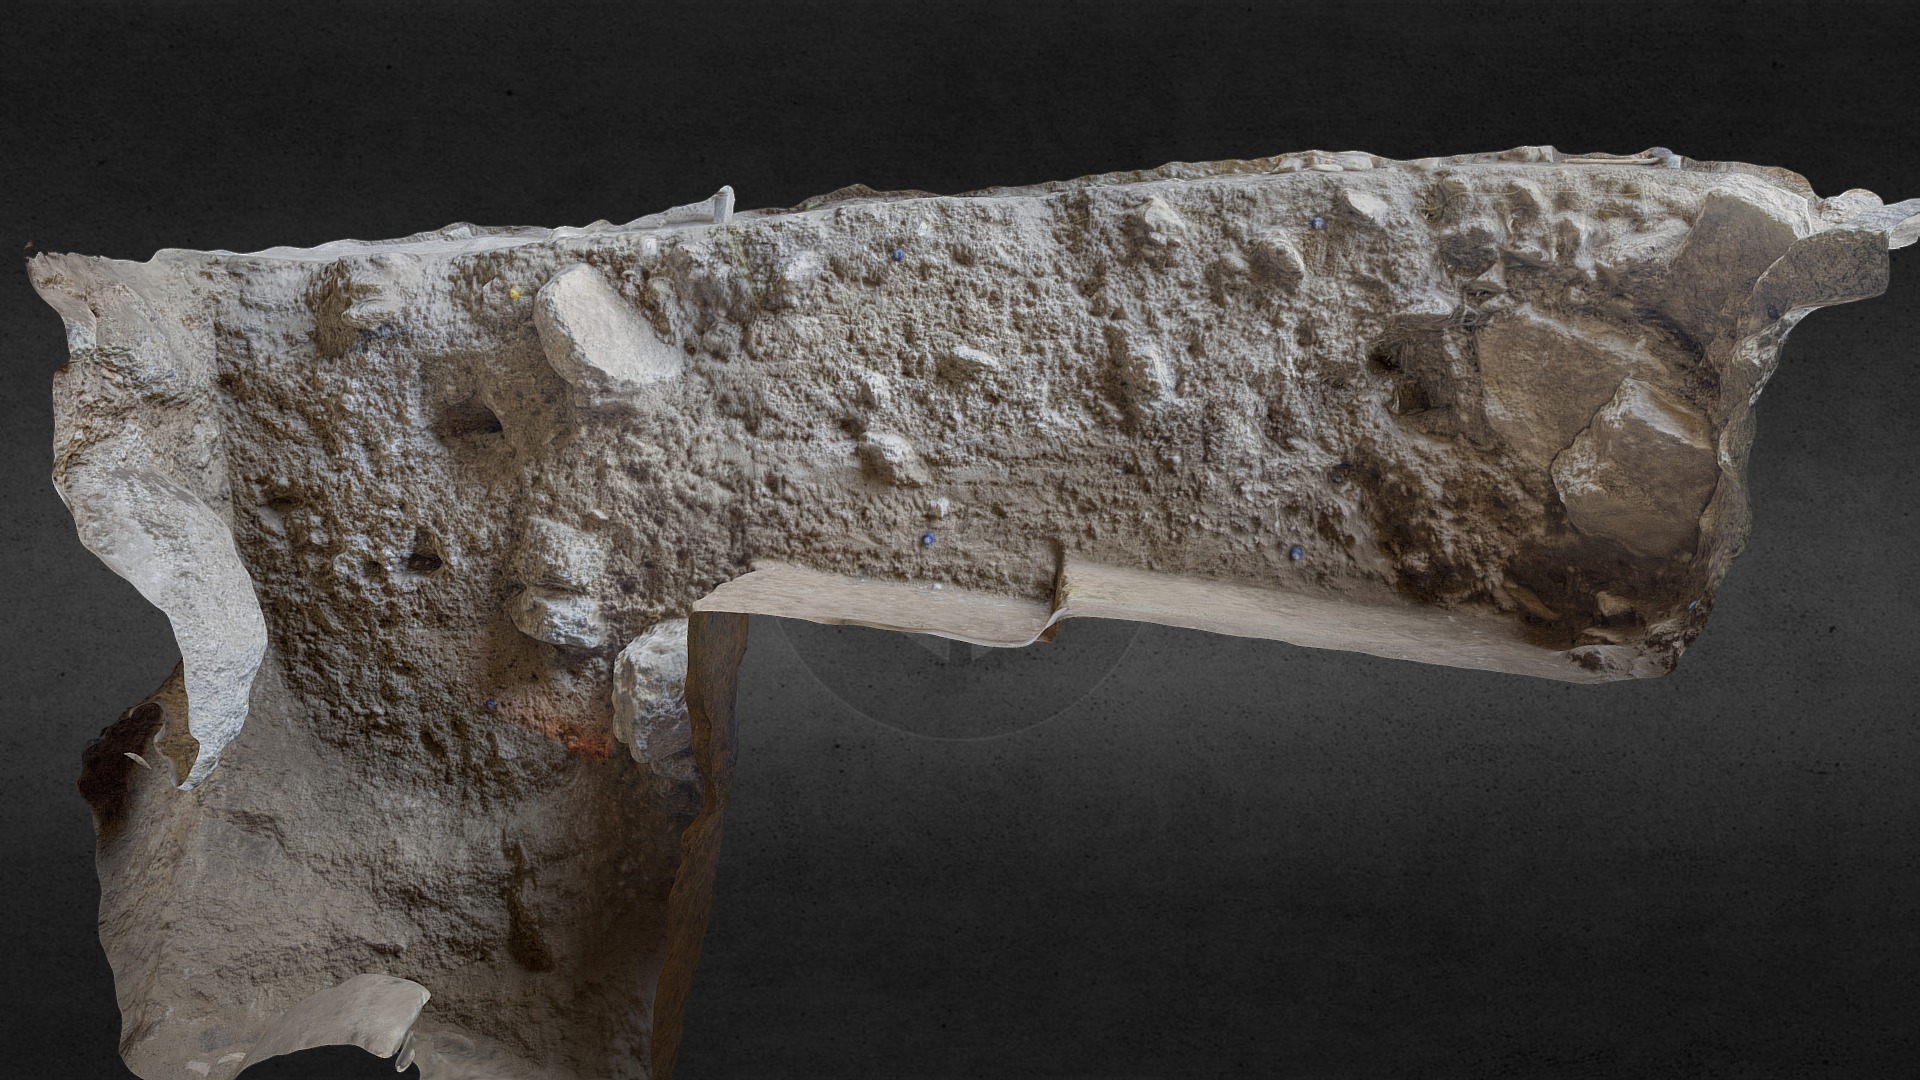 3D model Areni 2 – Section - This is a 3D model of the Areni 2 - Section. The 3D model is about a large rock formation.